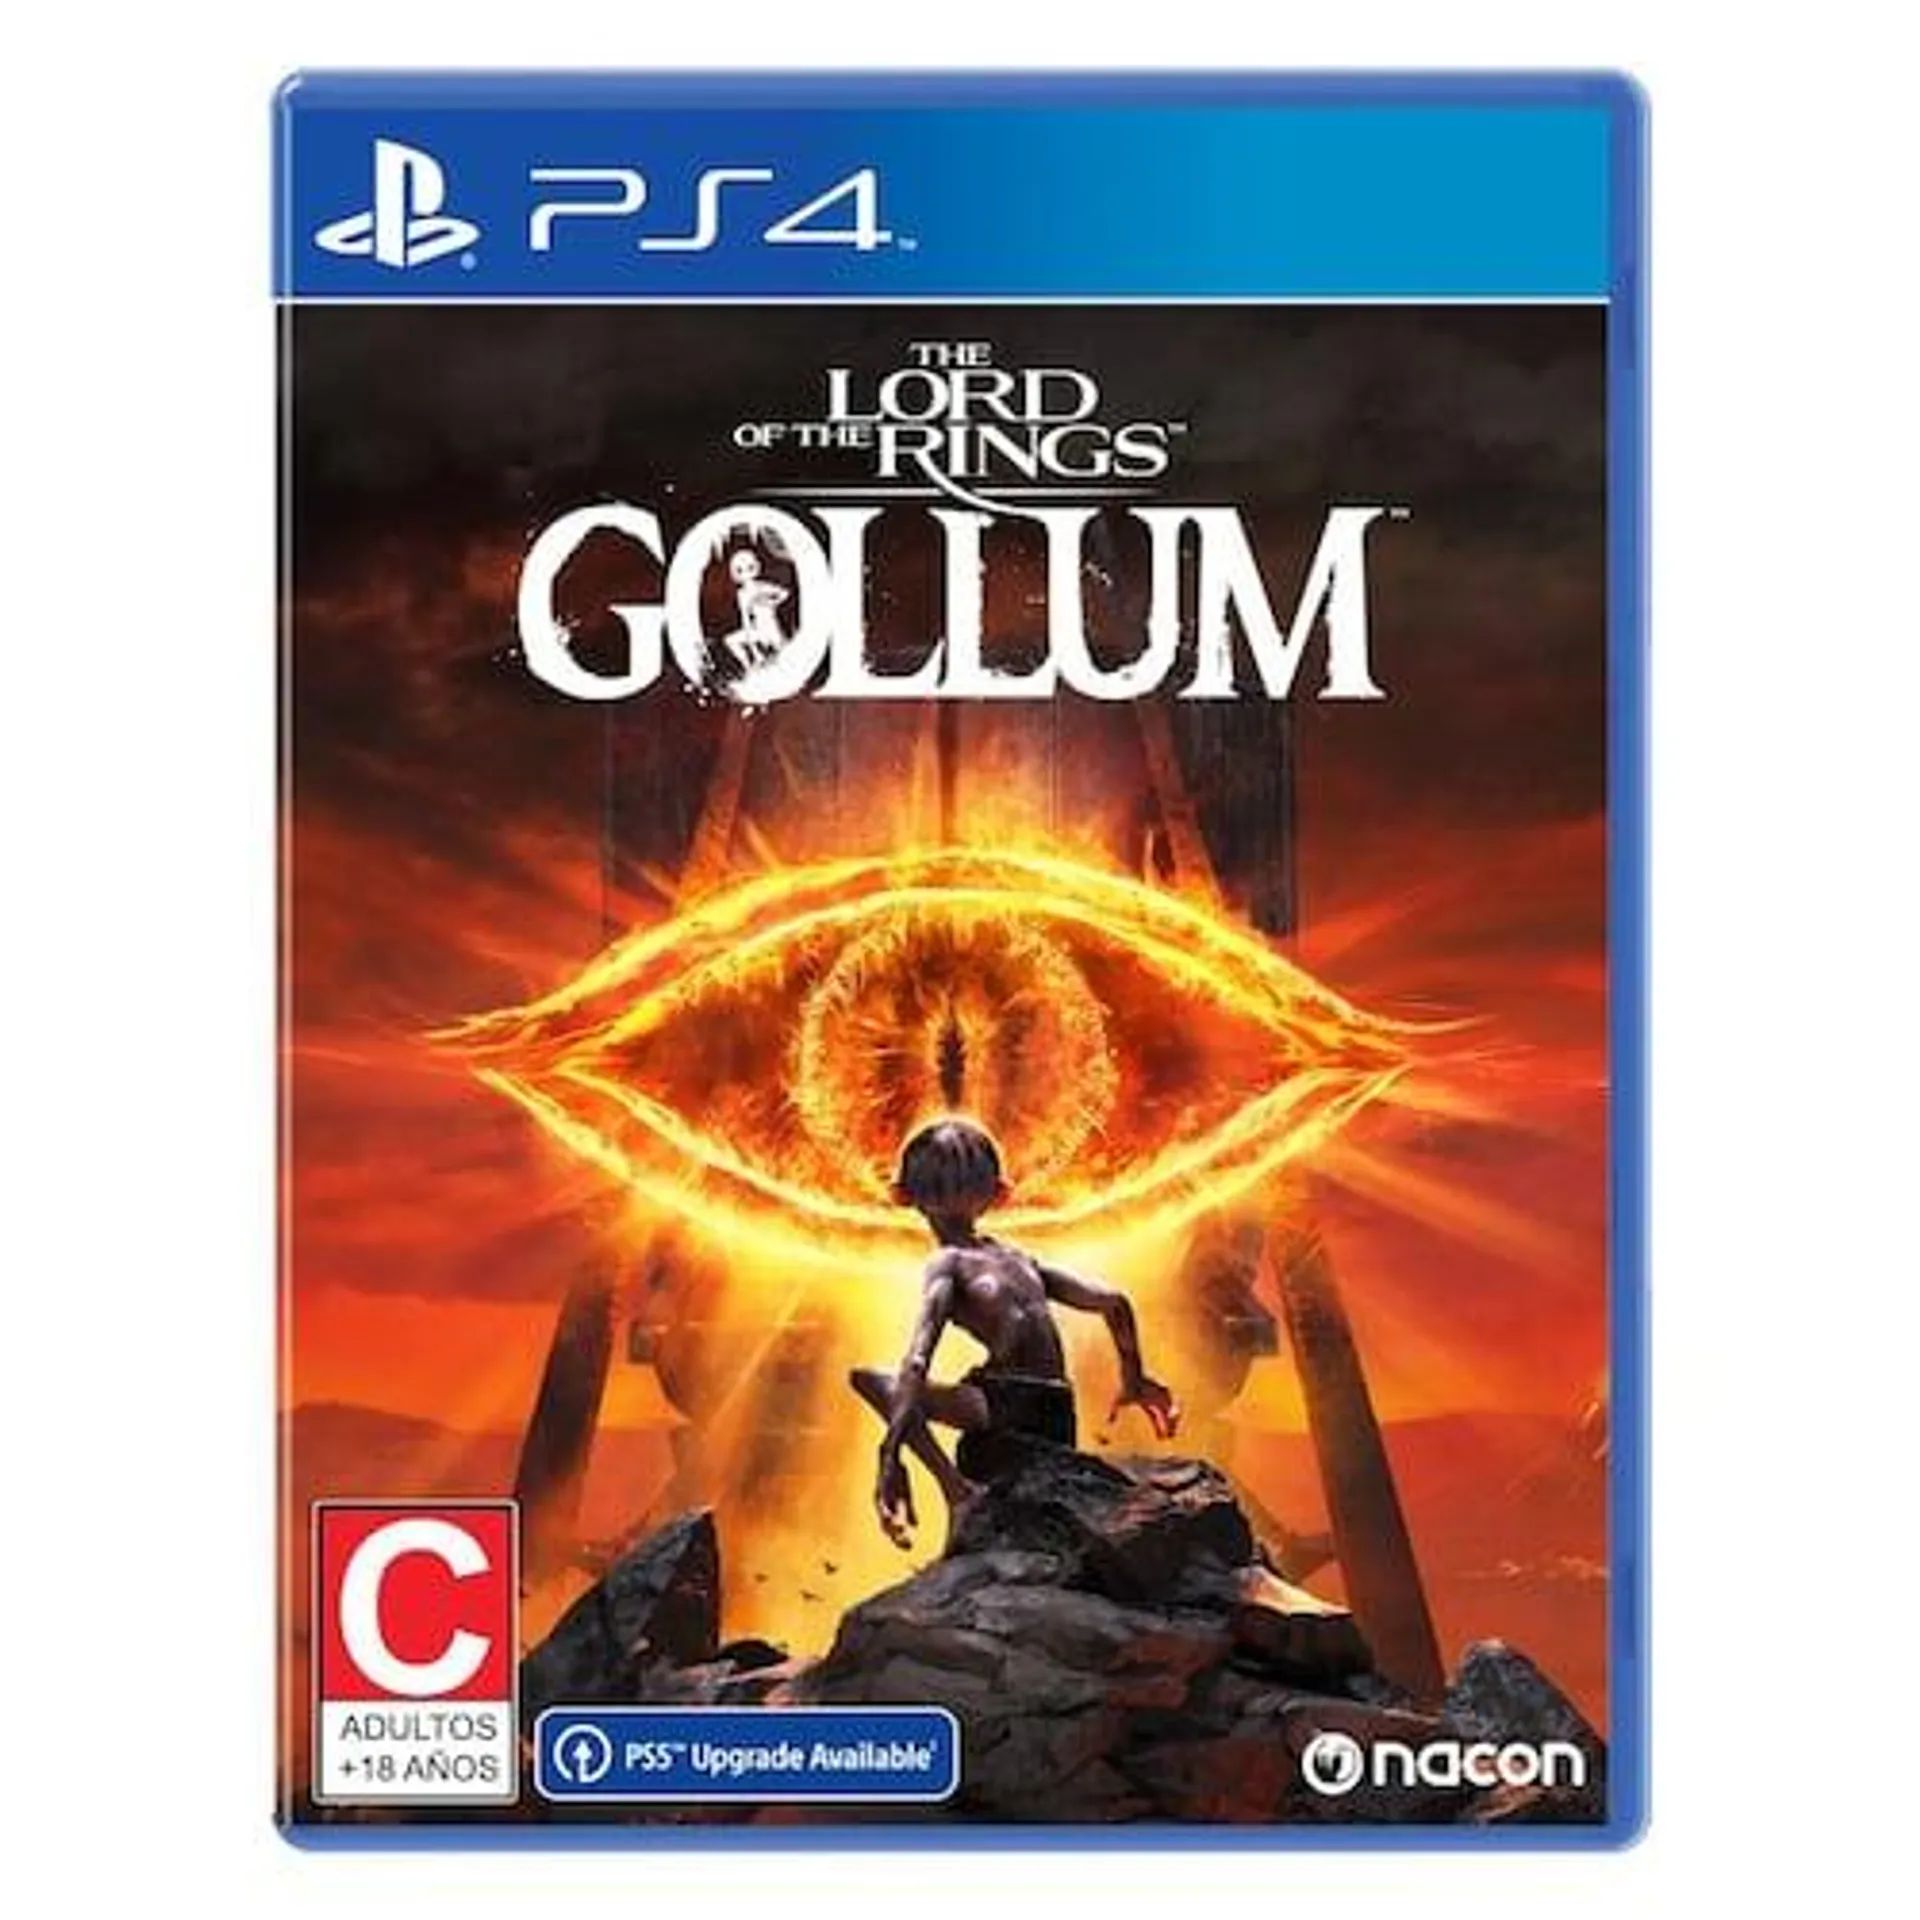 The lord of the rings Gollum - PlayStation 4